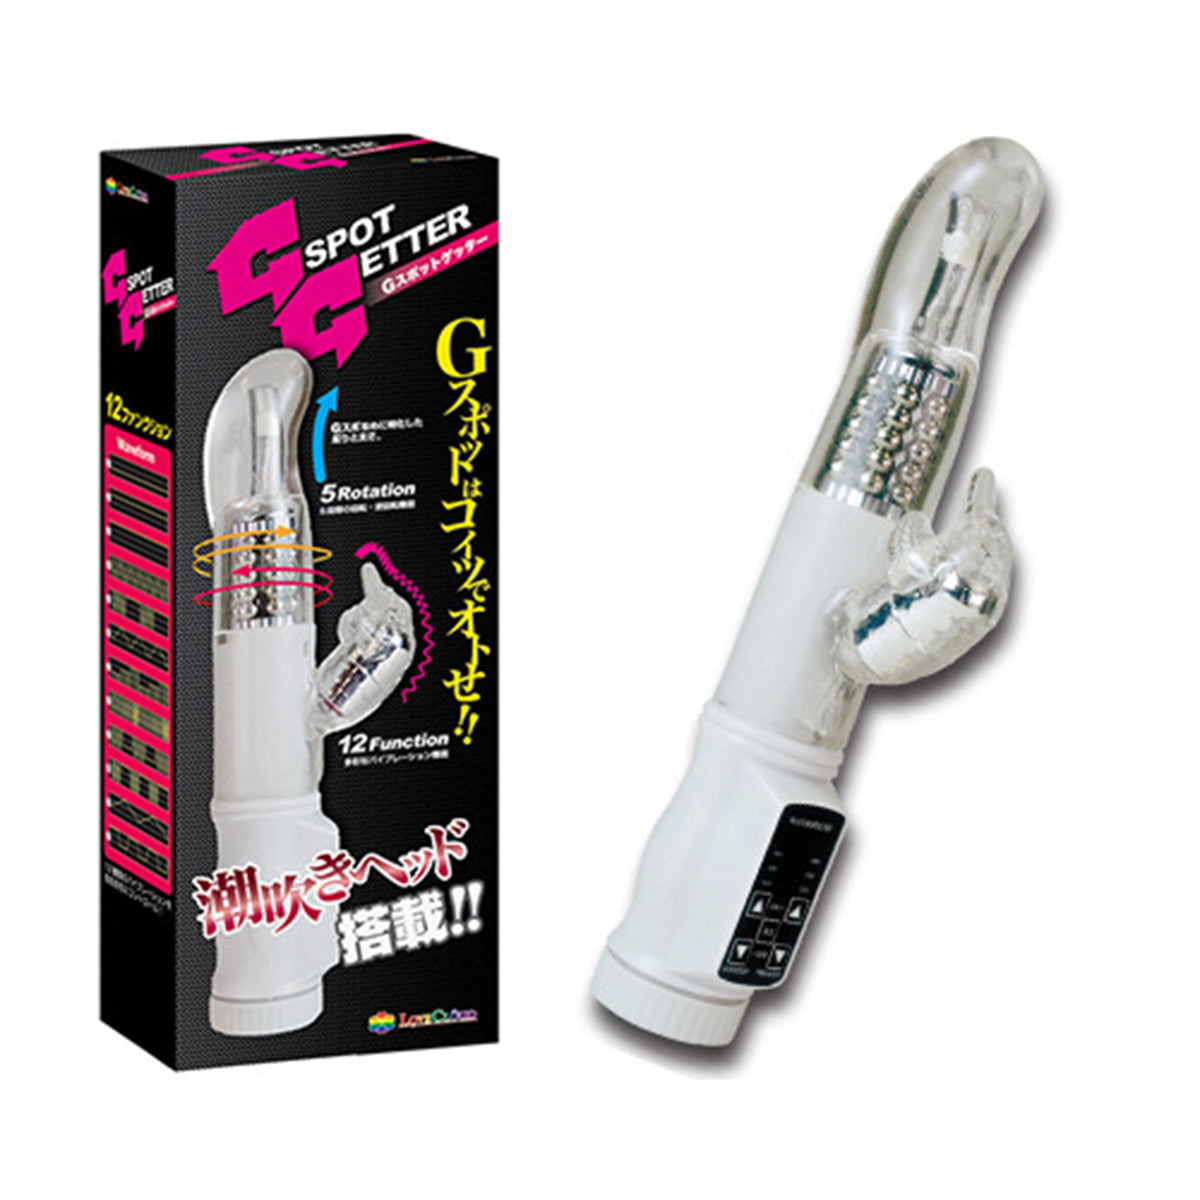 Gspot Getter G點震動棒